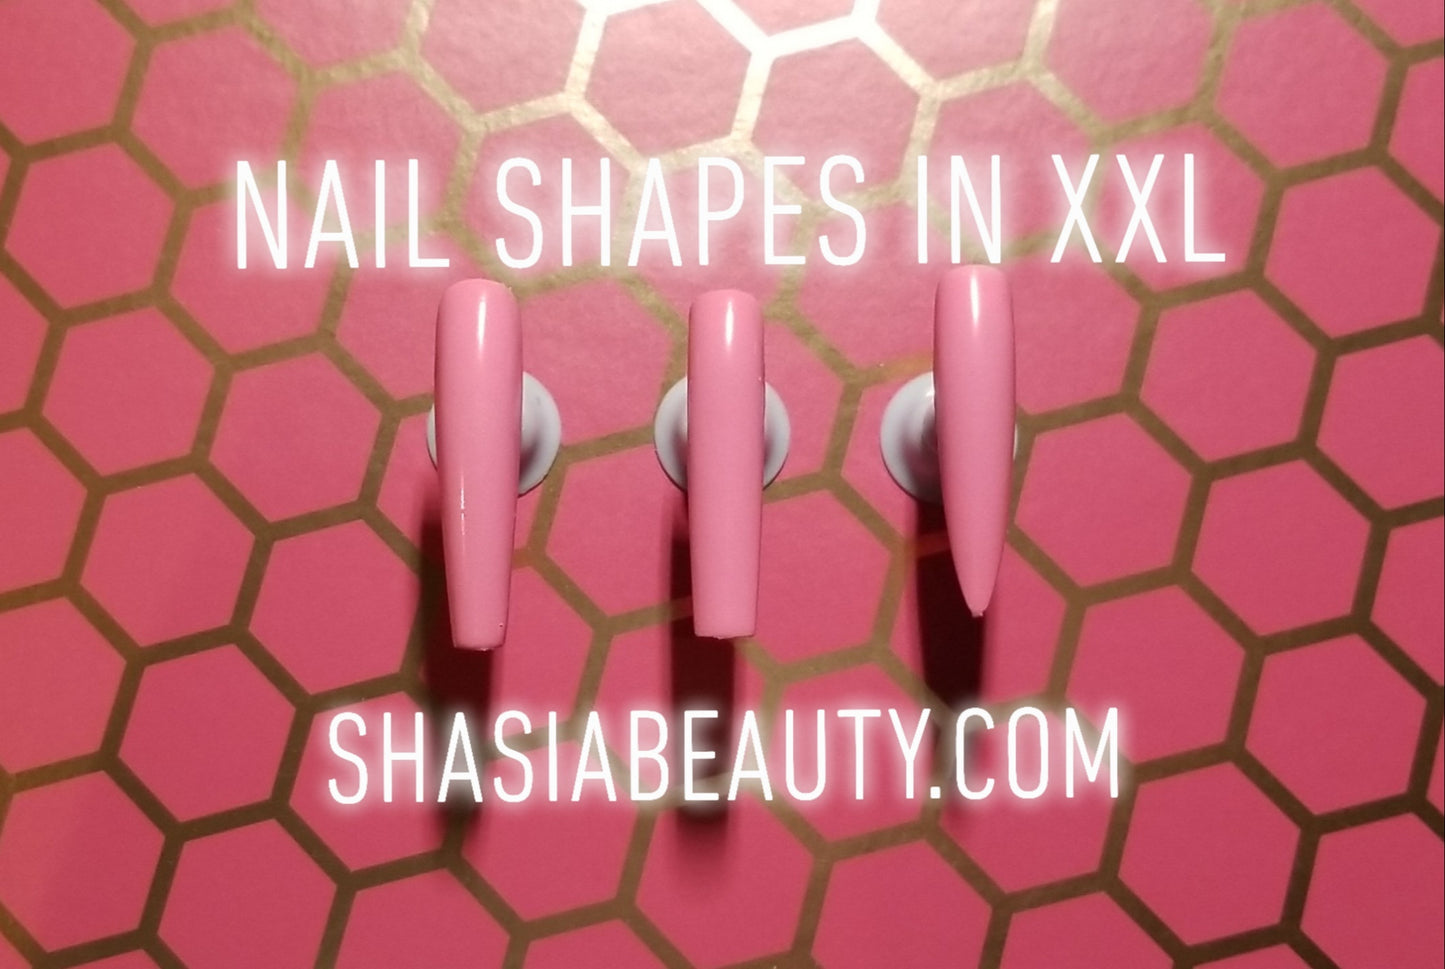 XXL Tapered Square  Full Cover Nails